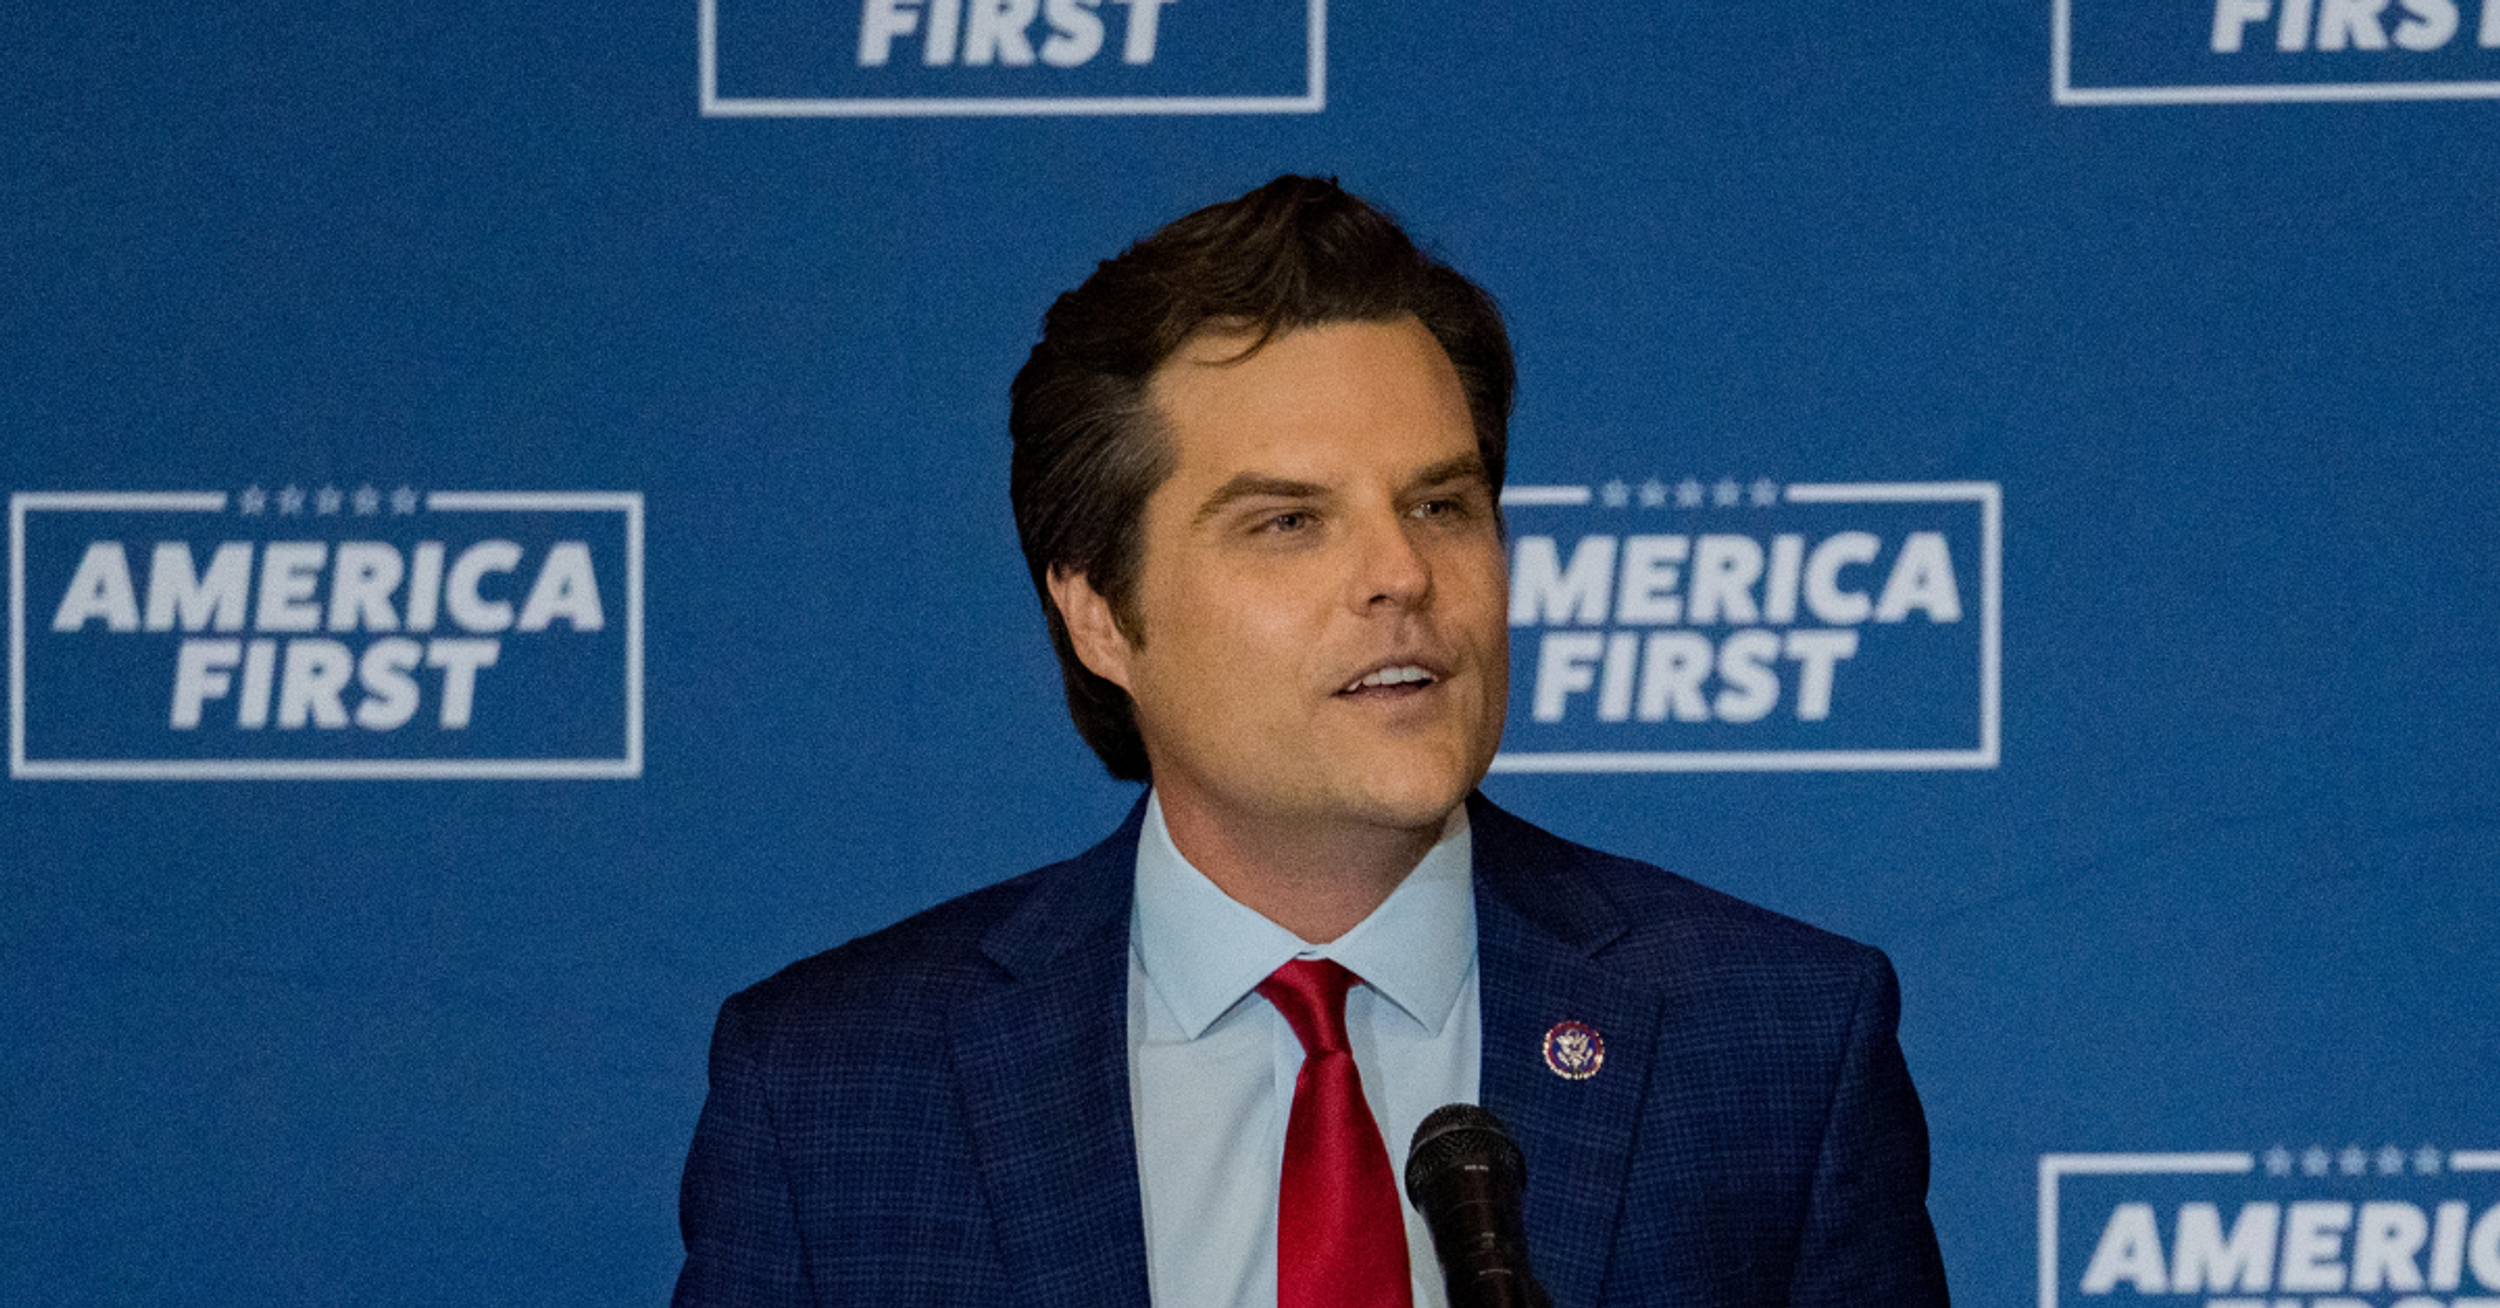 Matt Gaetz Posts Mind-Numbing 'America First' Tweet—And It Instantly Blows Up In His Face